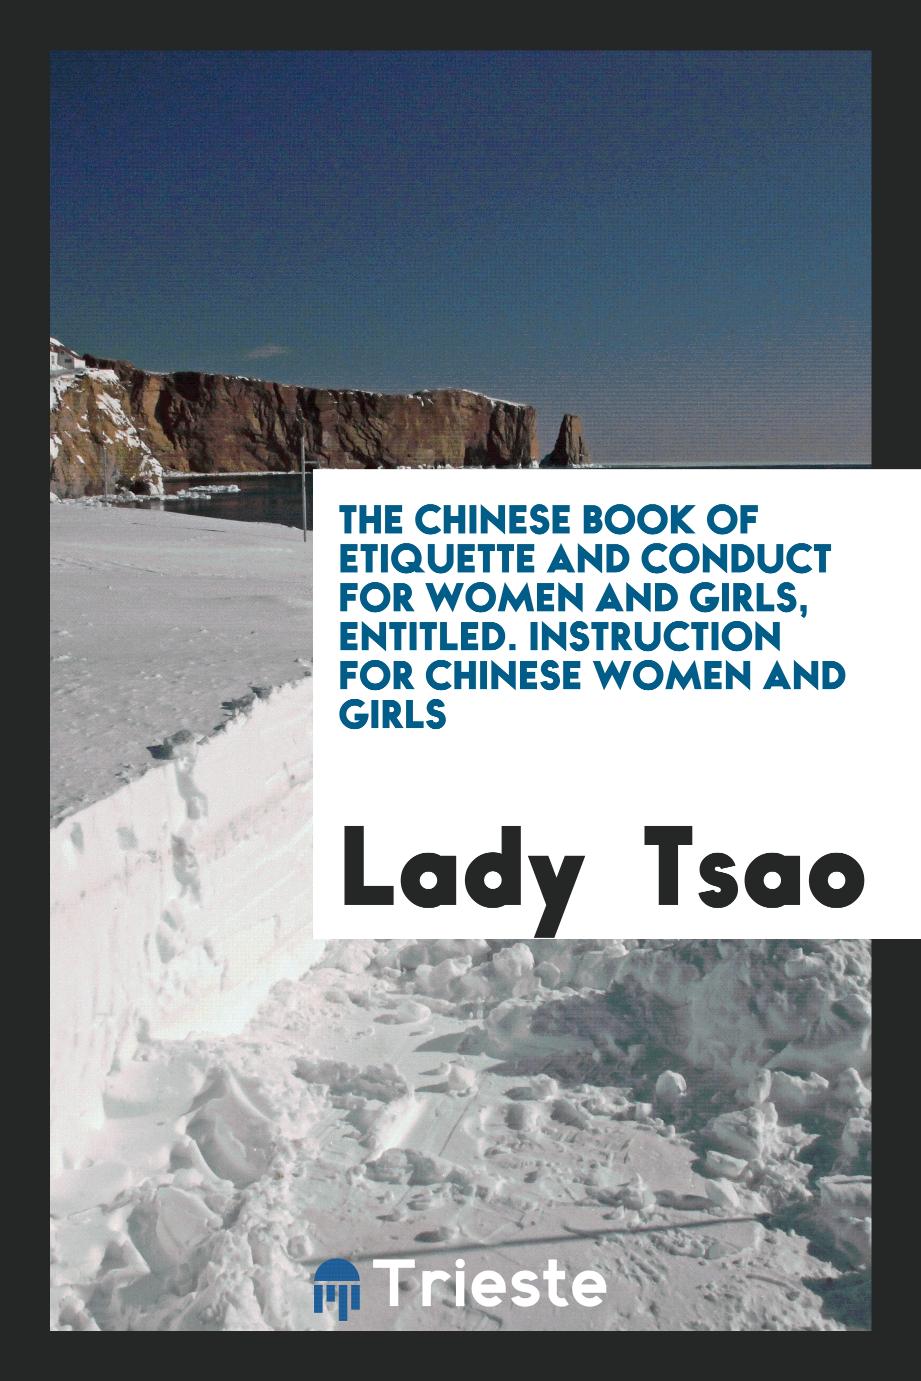 The Chinese Book of Etiquette and Conduct for Women and Girls, Entitled. Instruction for Chinese women and girls